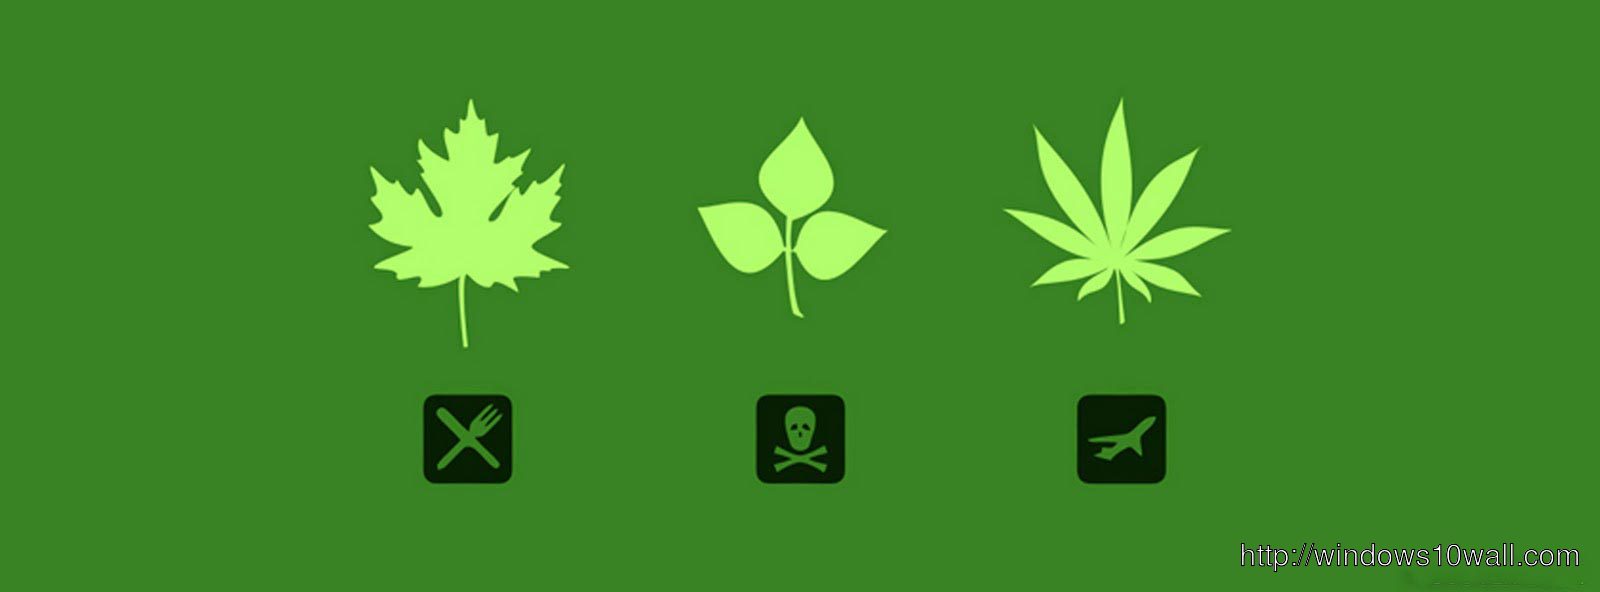 Happy Greeny Facebook Timeline Background Cover